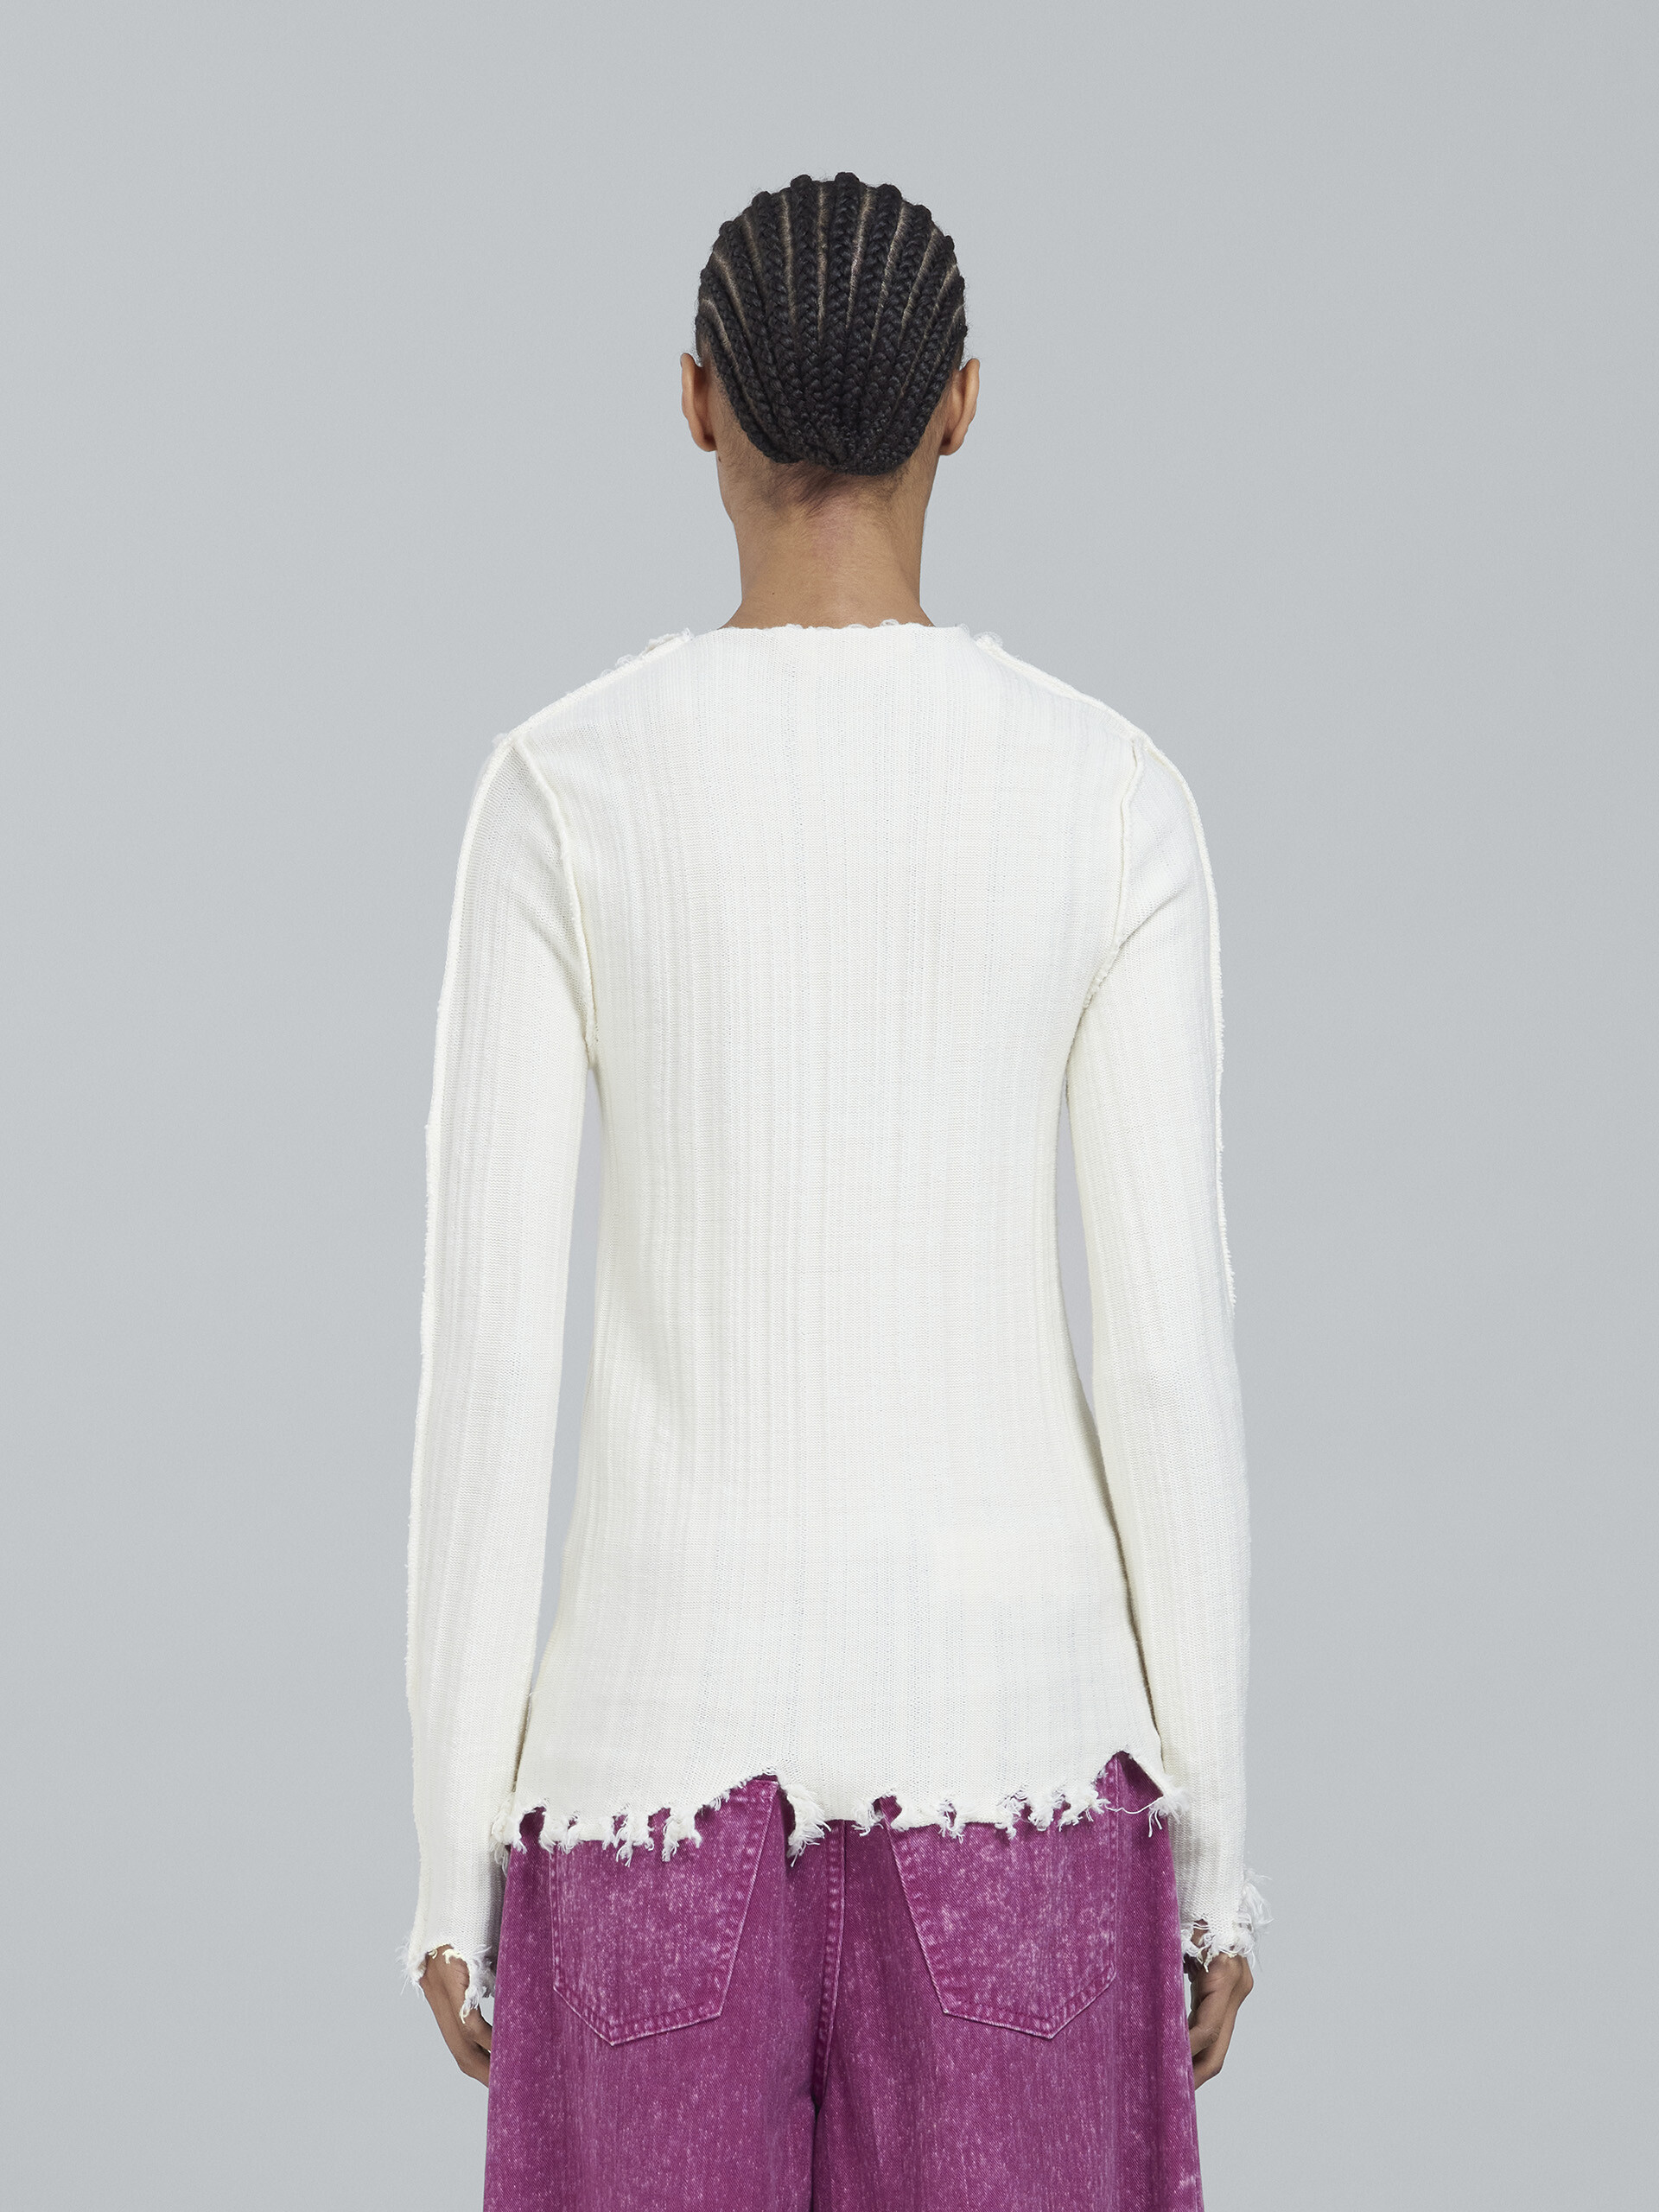 Cotton and virgin wool crewneck sweater - Pullovers - Image 3